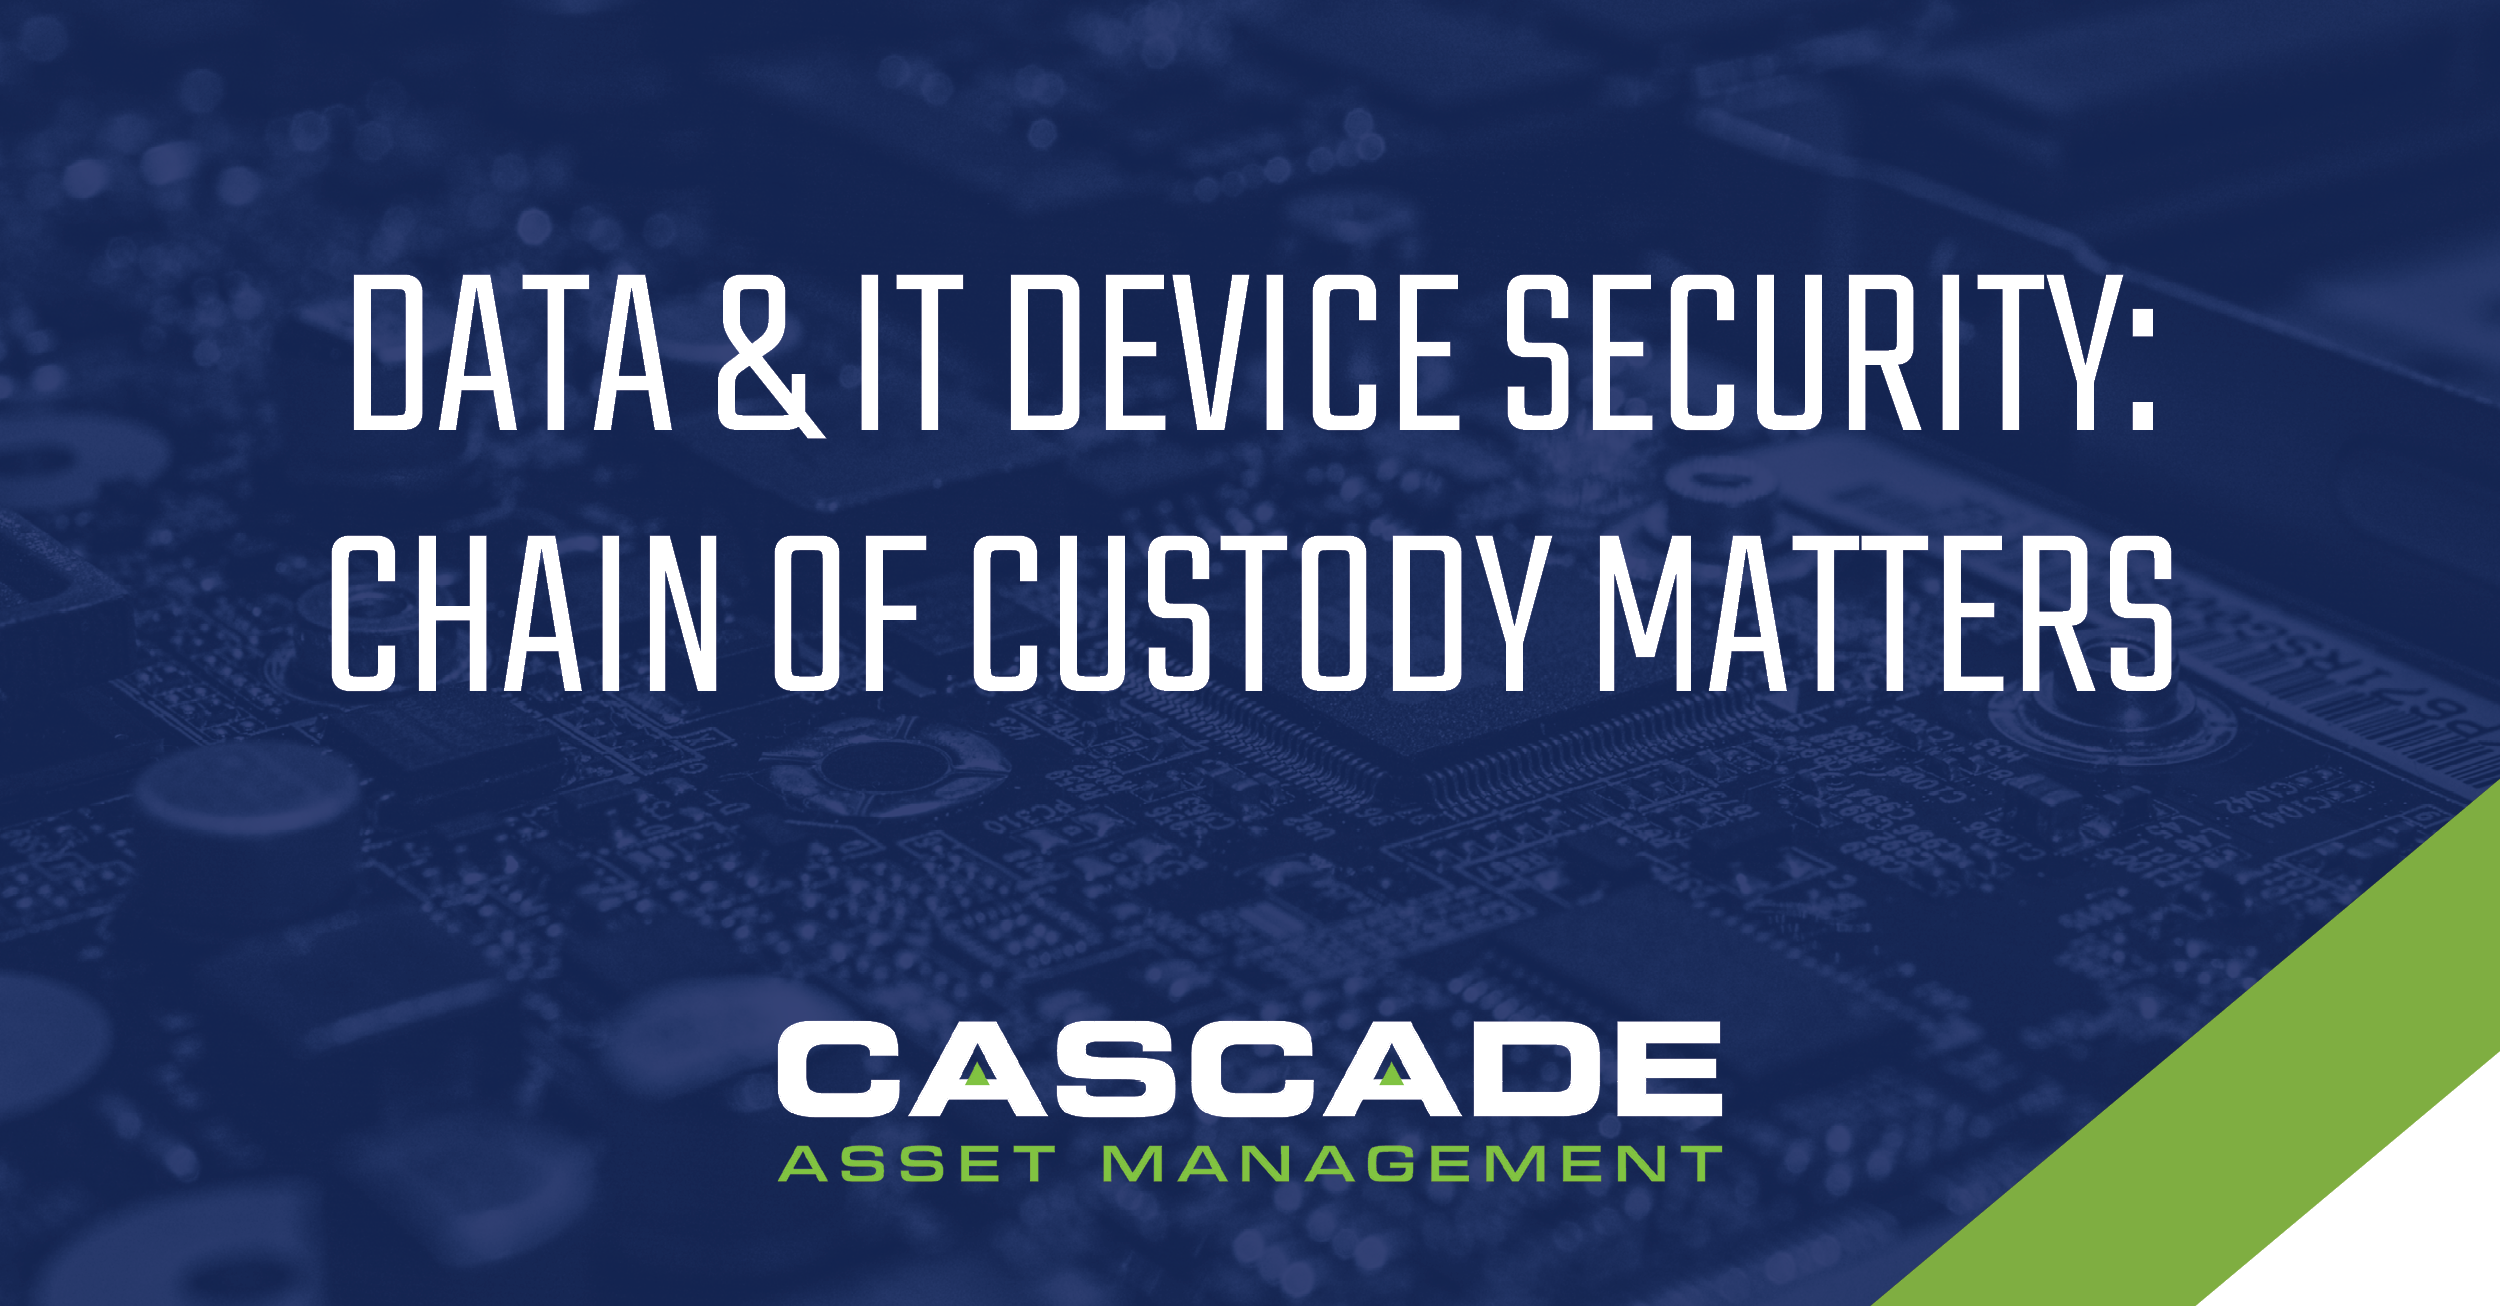 Blog Post: Data & IT Device Security - Chain of Custody Matters